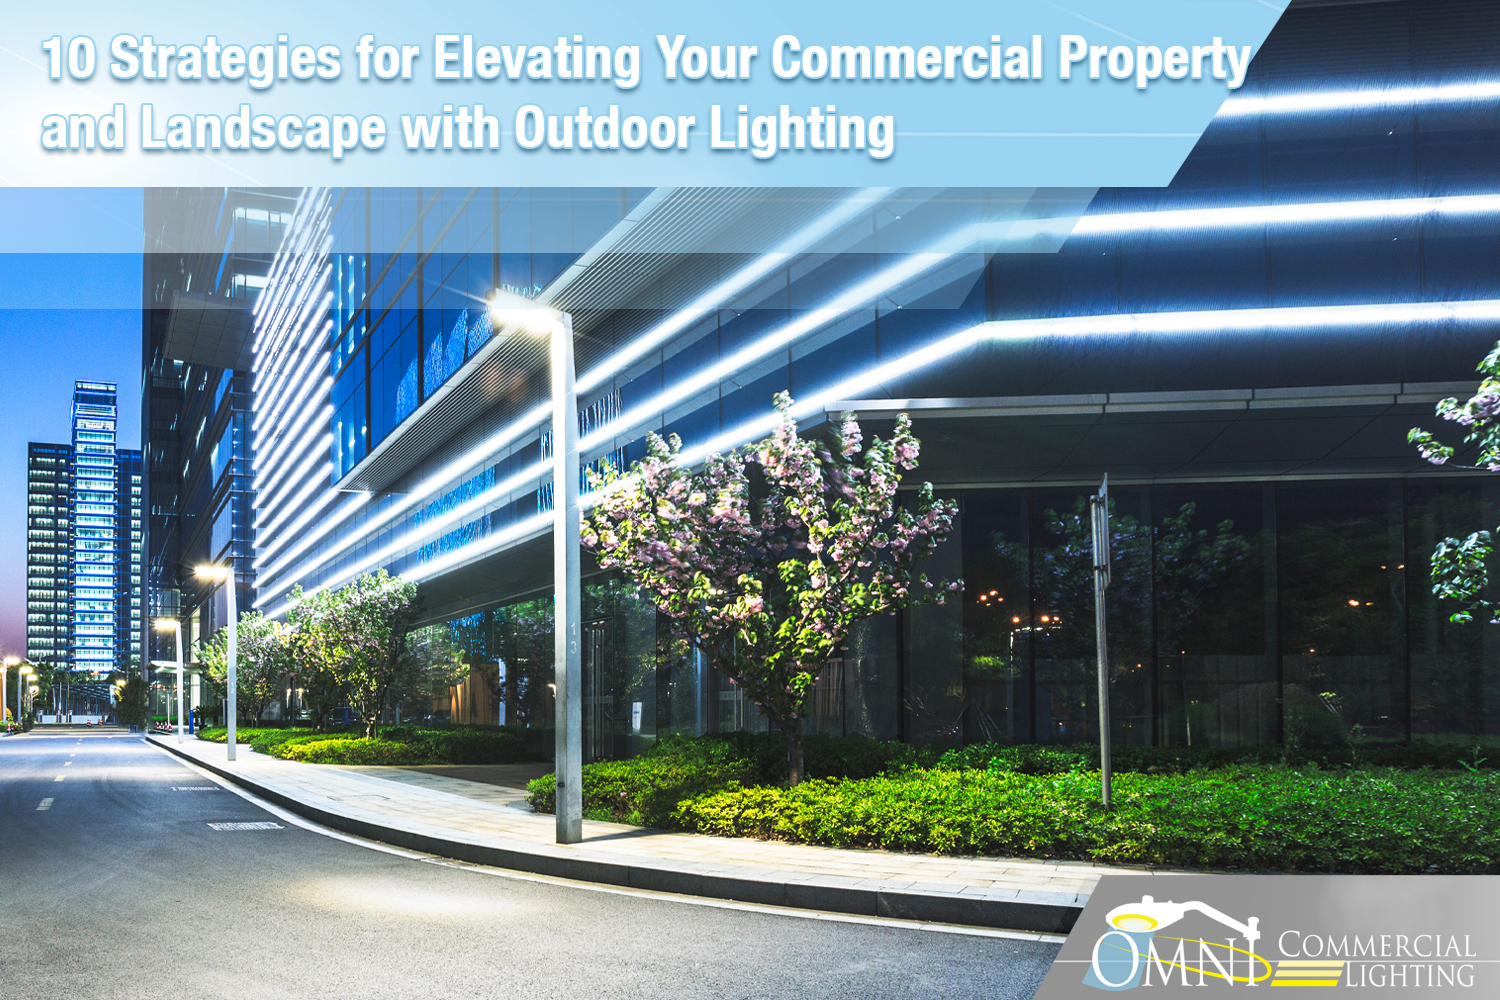 10 Strategies for Elevating Your Commercial Property and Landscape with Outdoor Lighting